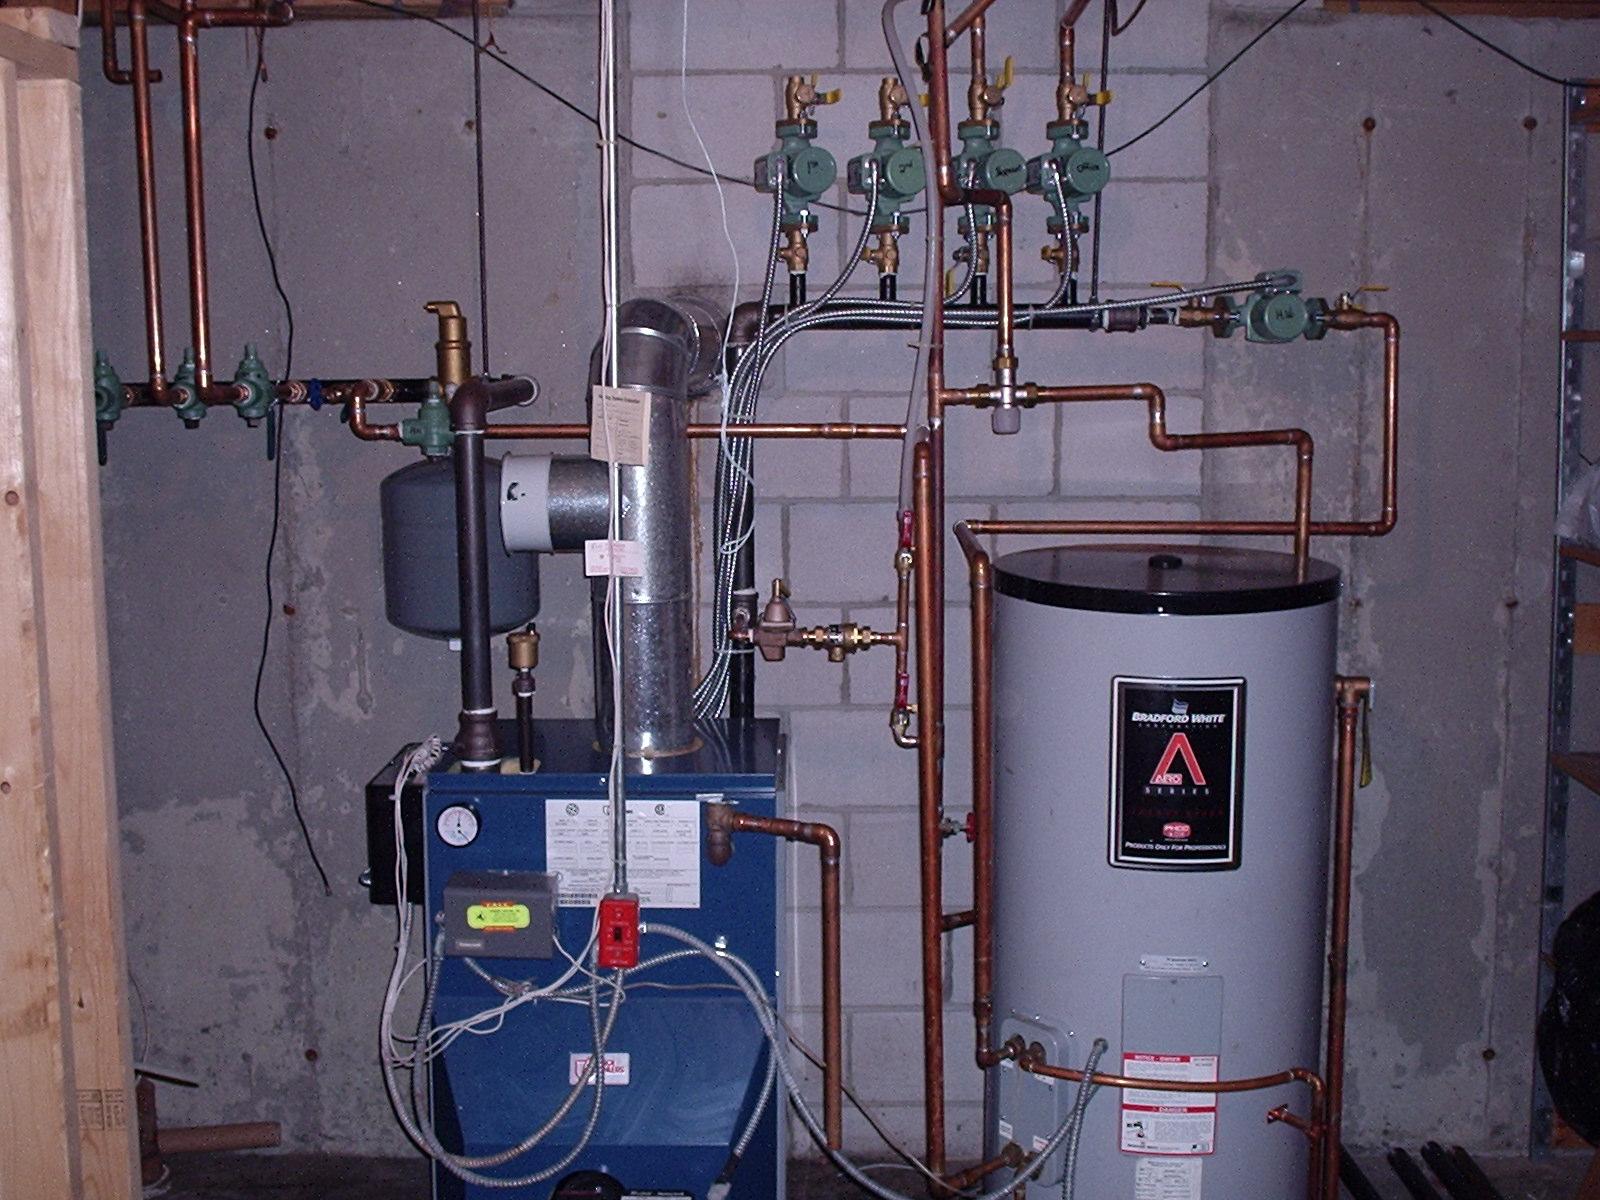 Boiler and water heater